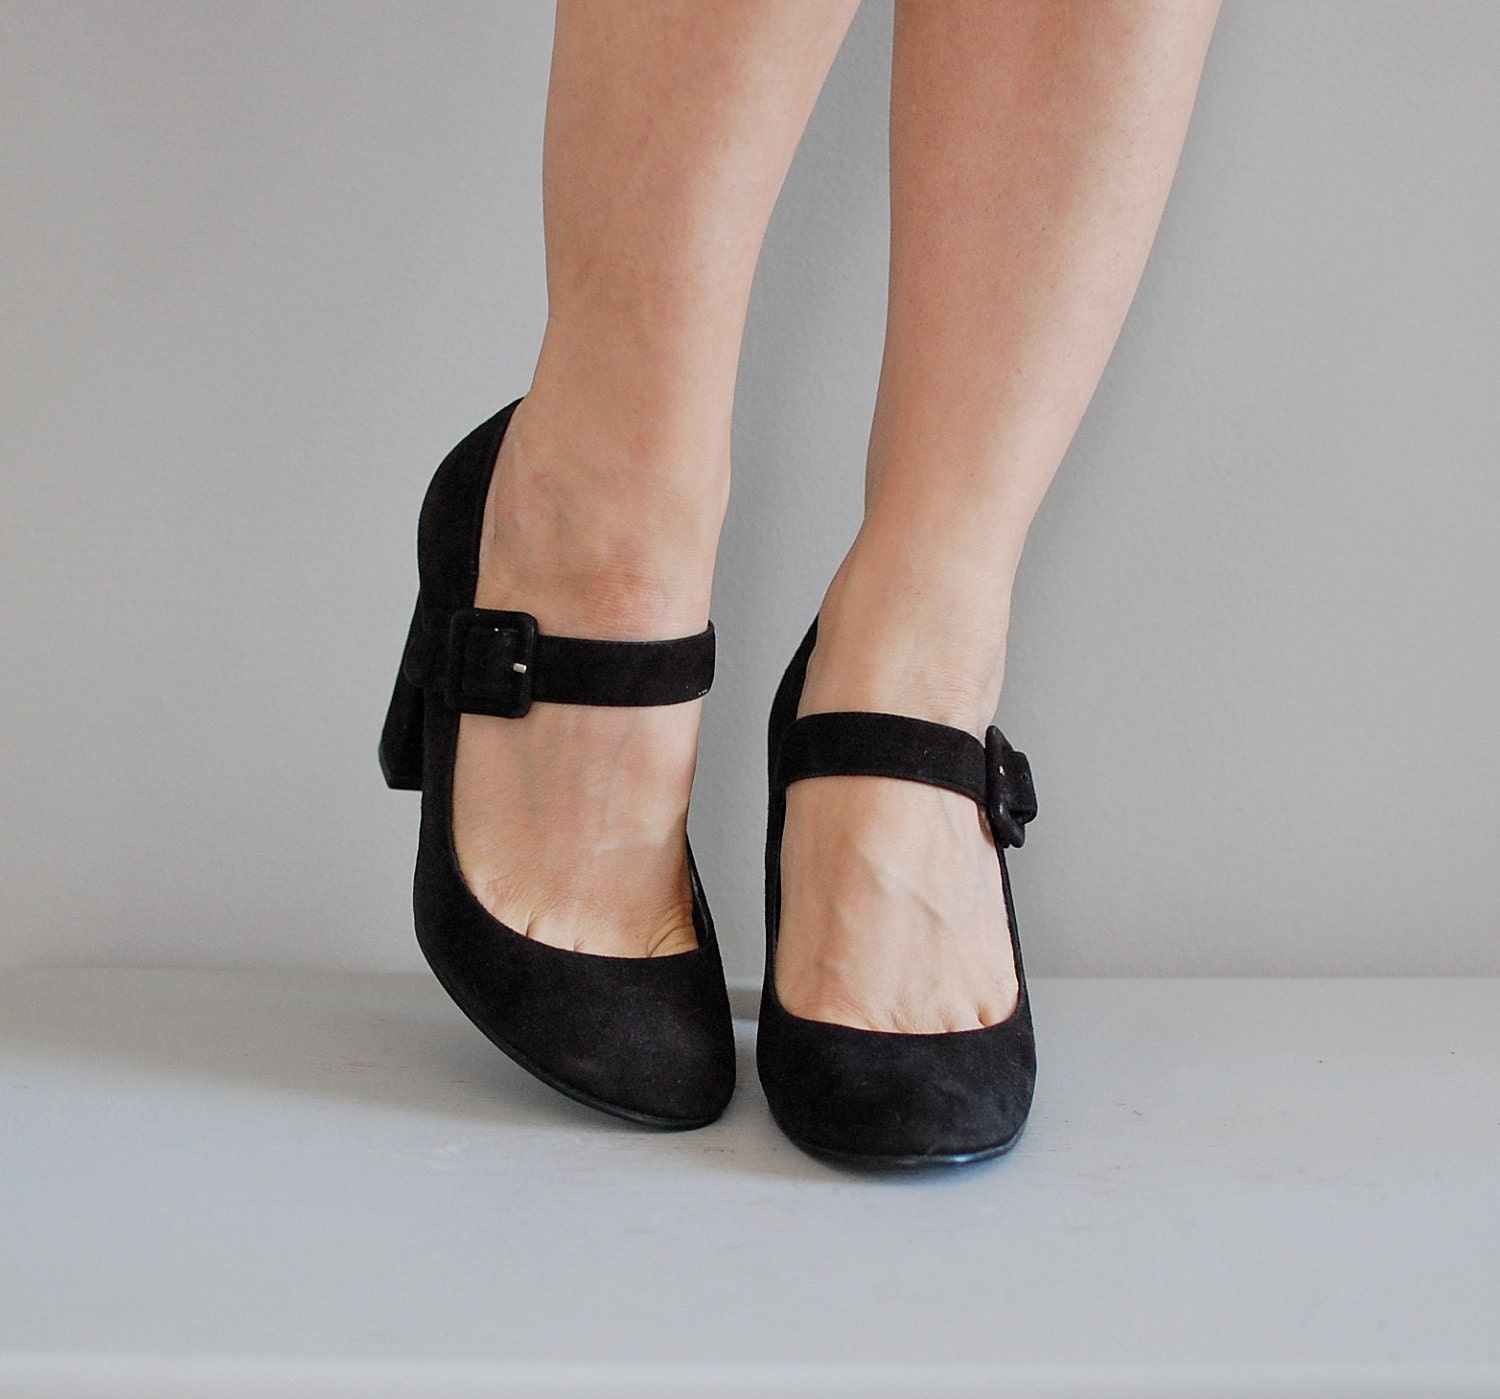 mary janes / black mary janes / round toe suede heels